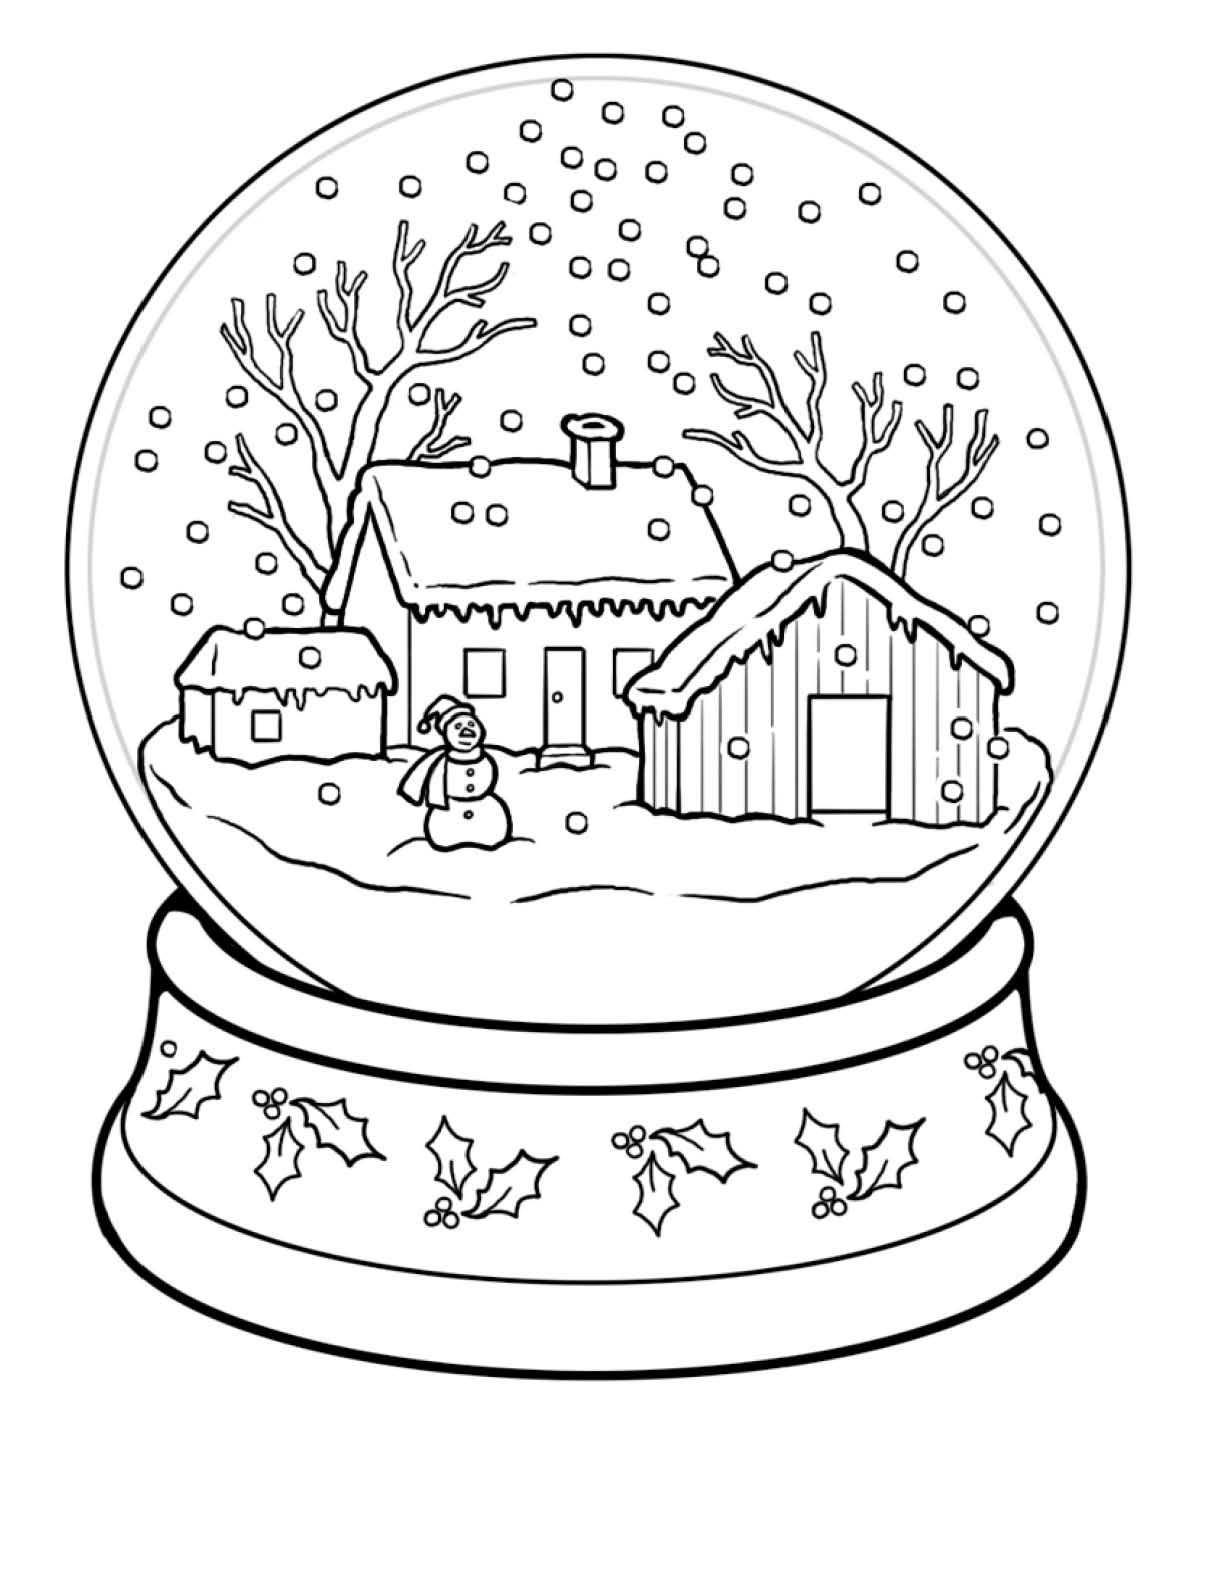 Winter Scenes Coloring Pages Printable   Coloring Pages Winter ...